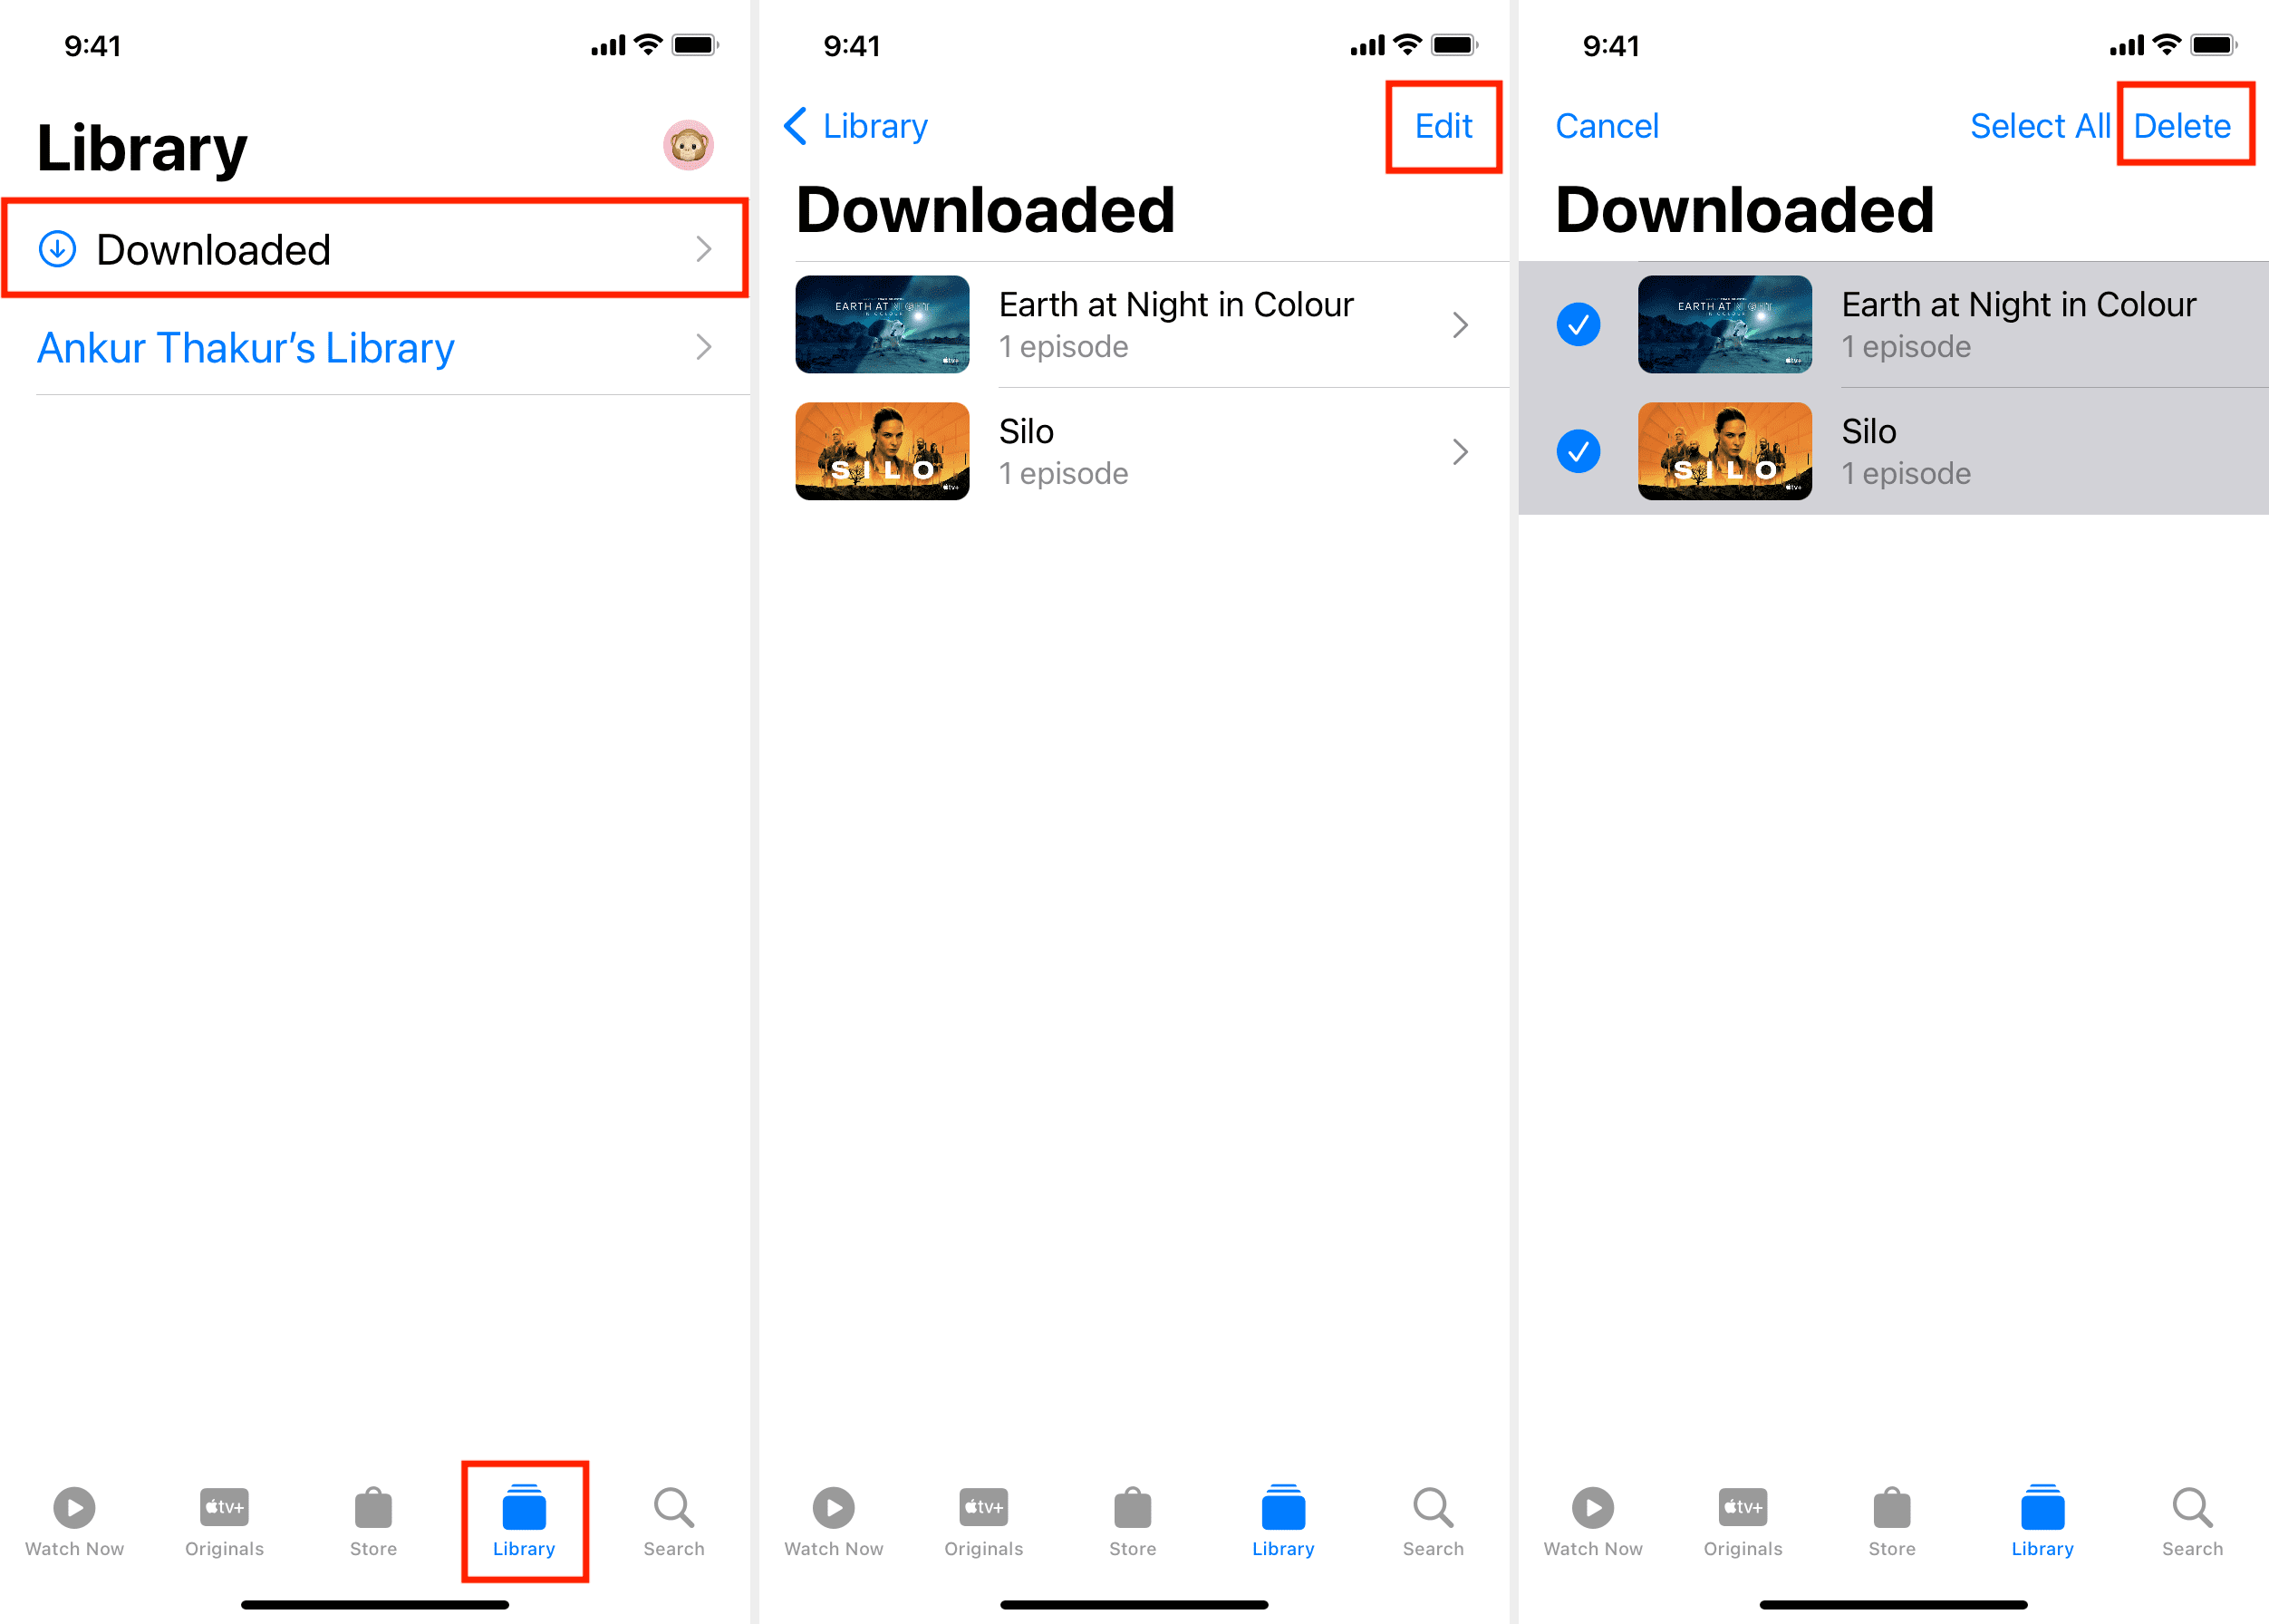 Remove downloaded TV shows from your iPhone